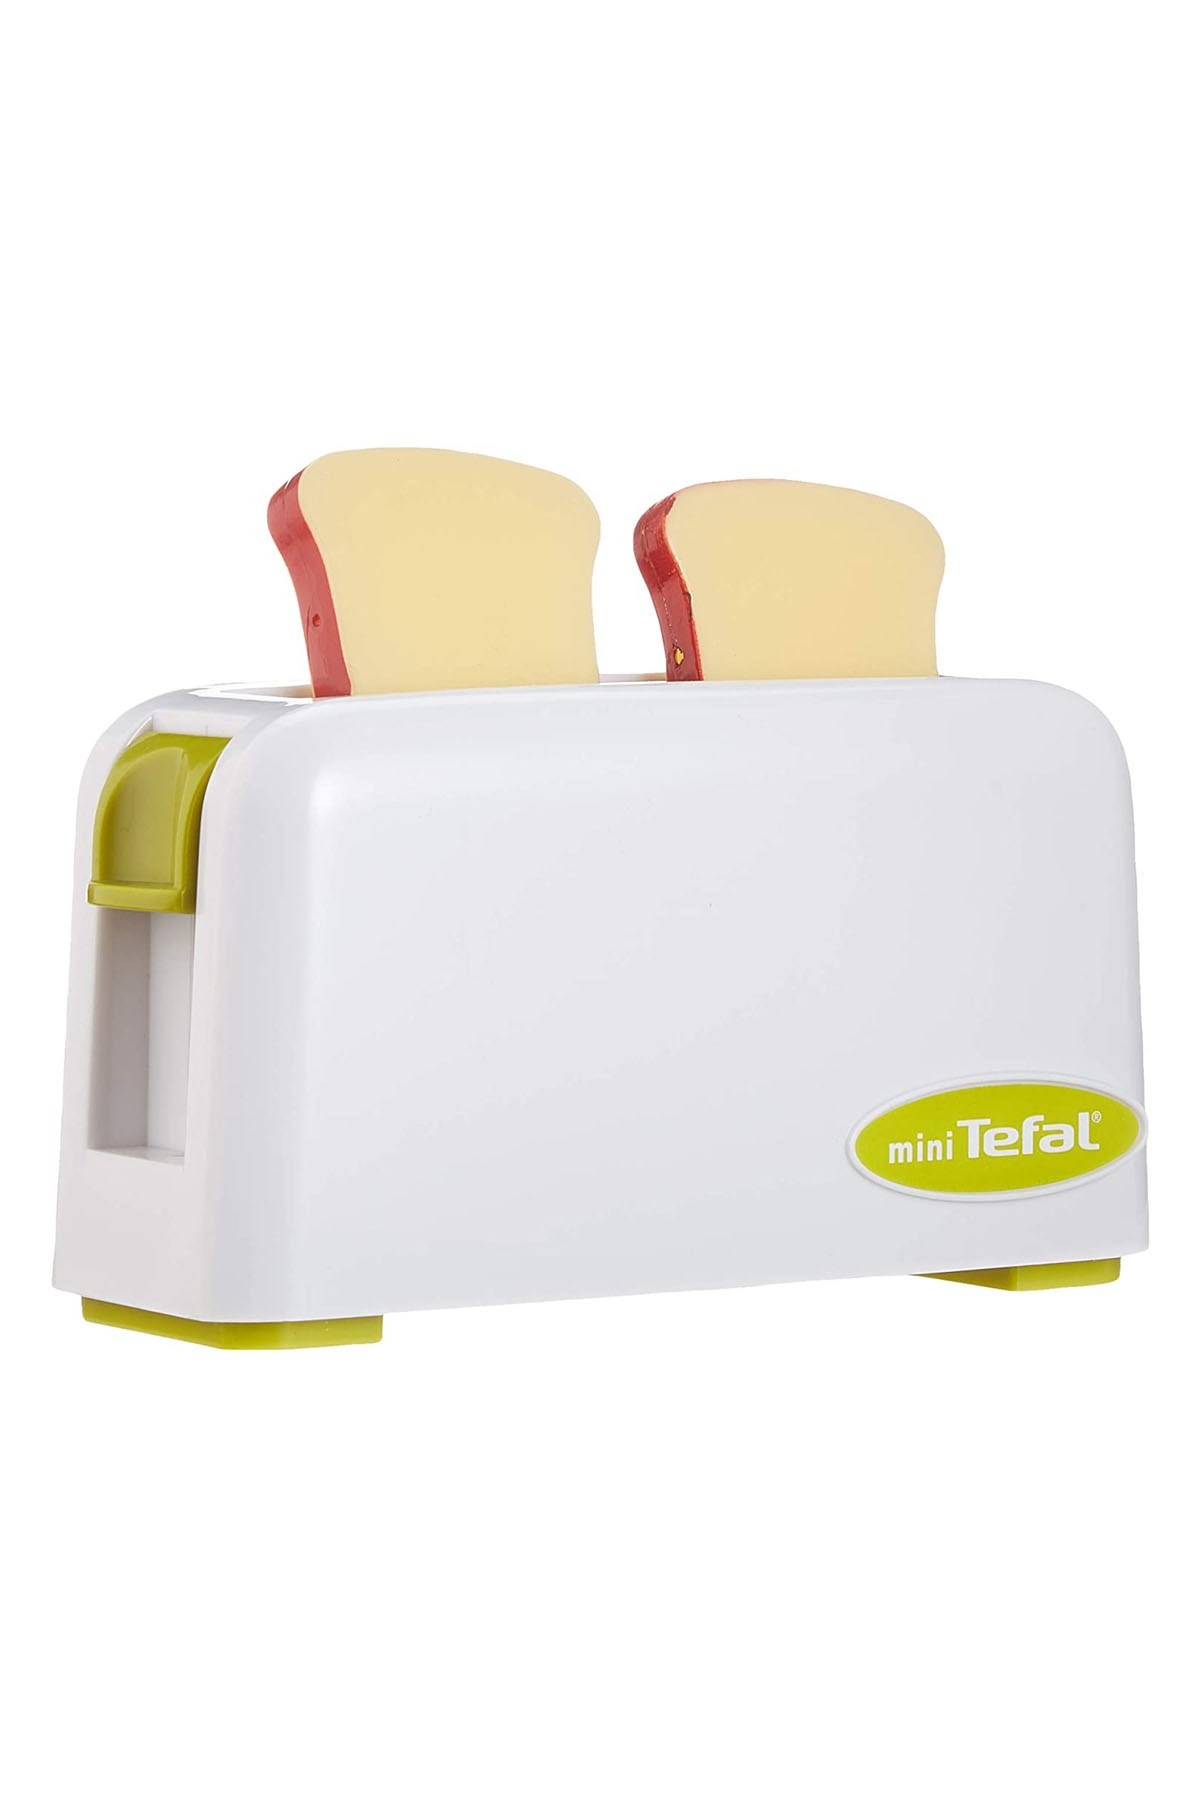 Smoby Tefal Tost Makinesi